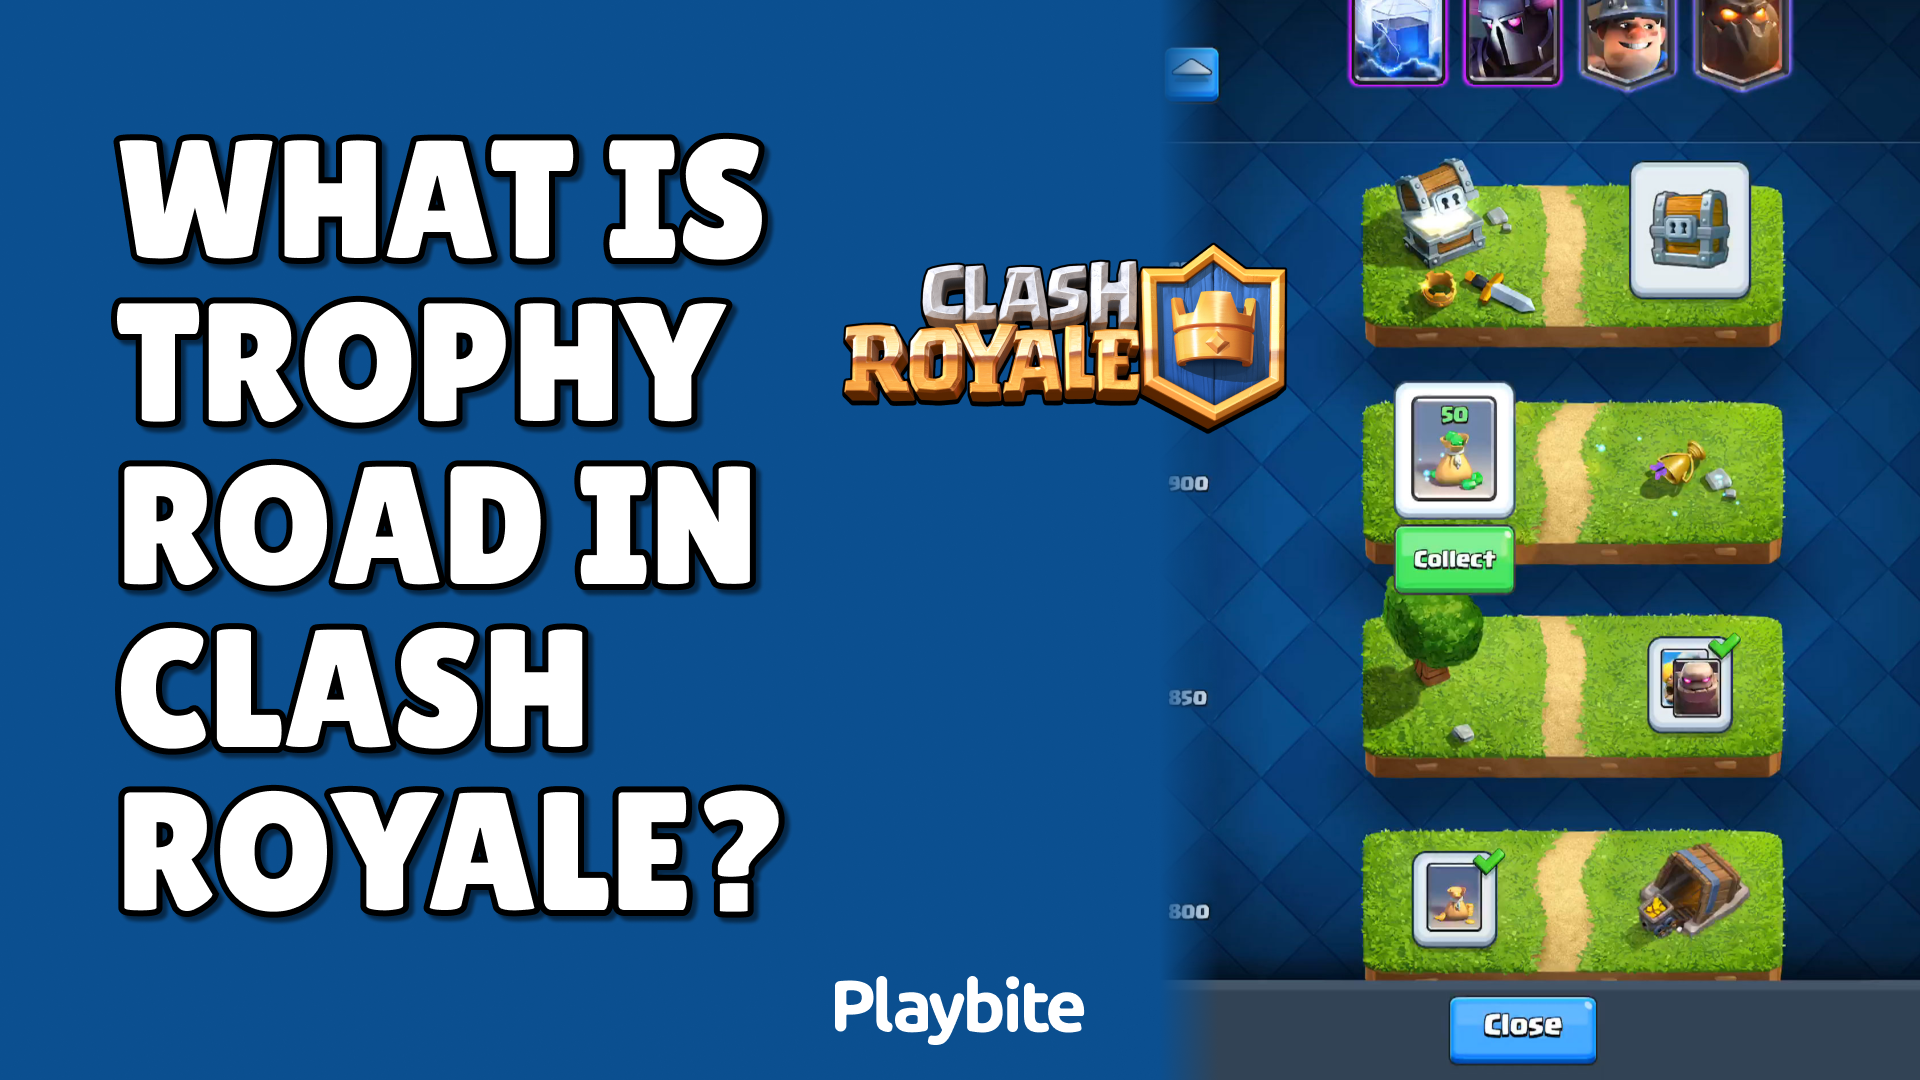 What Is The Trophy Road In Clash Royale?